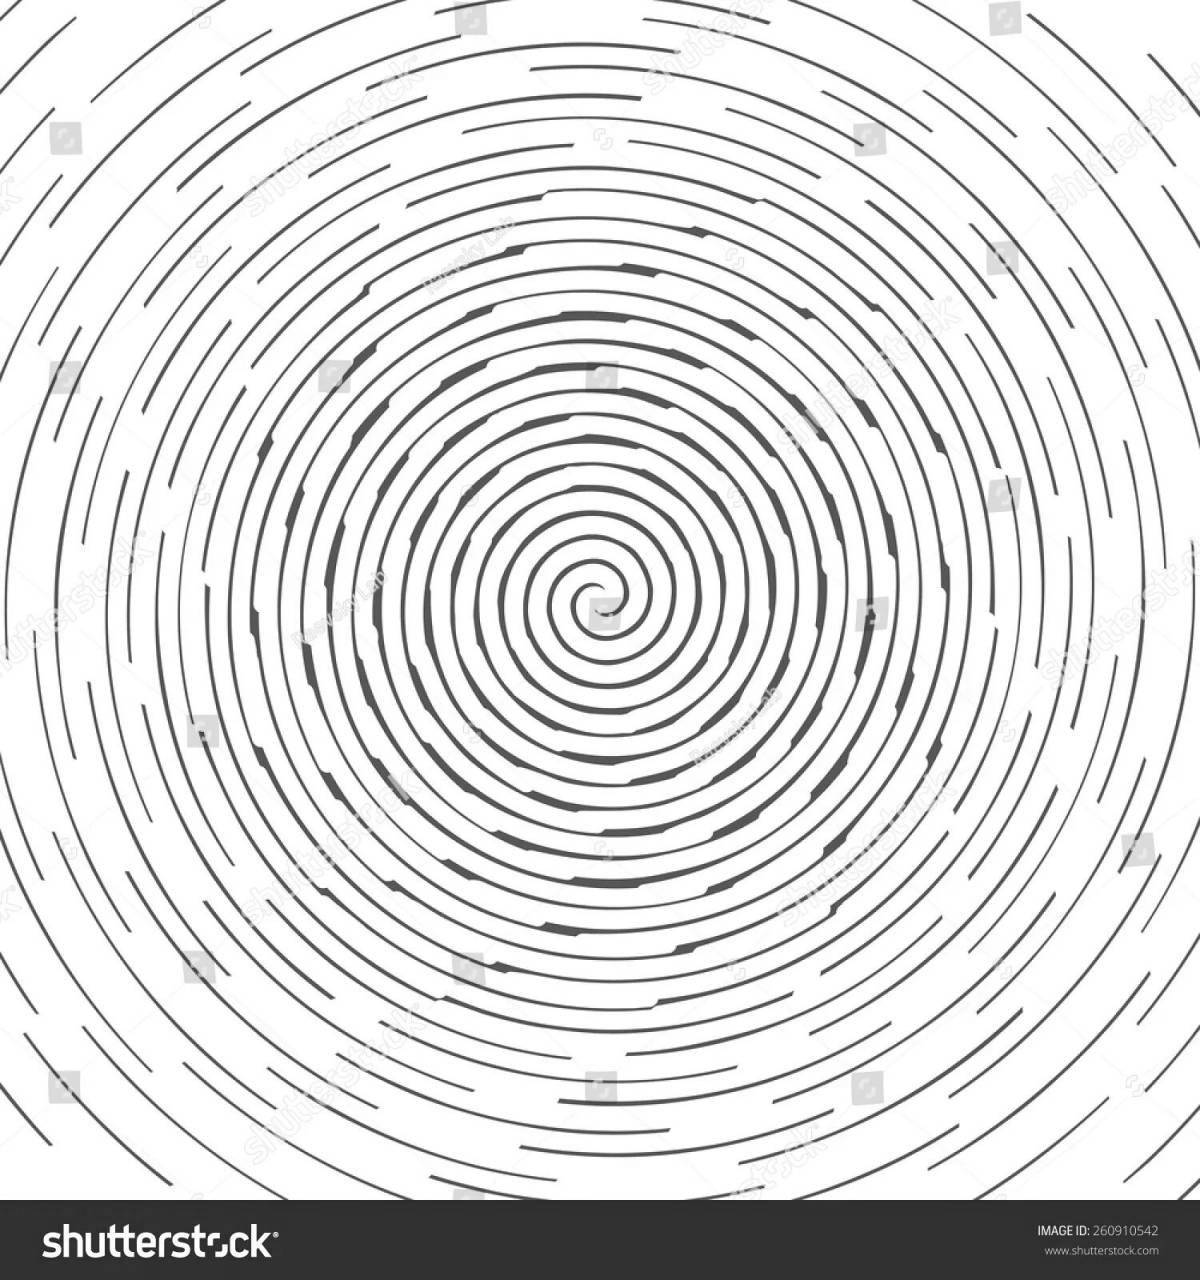 Gorgeous spiral coloring with a circular pattern